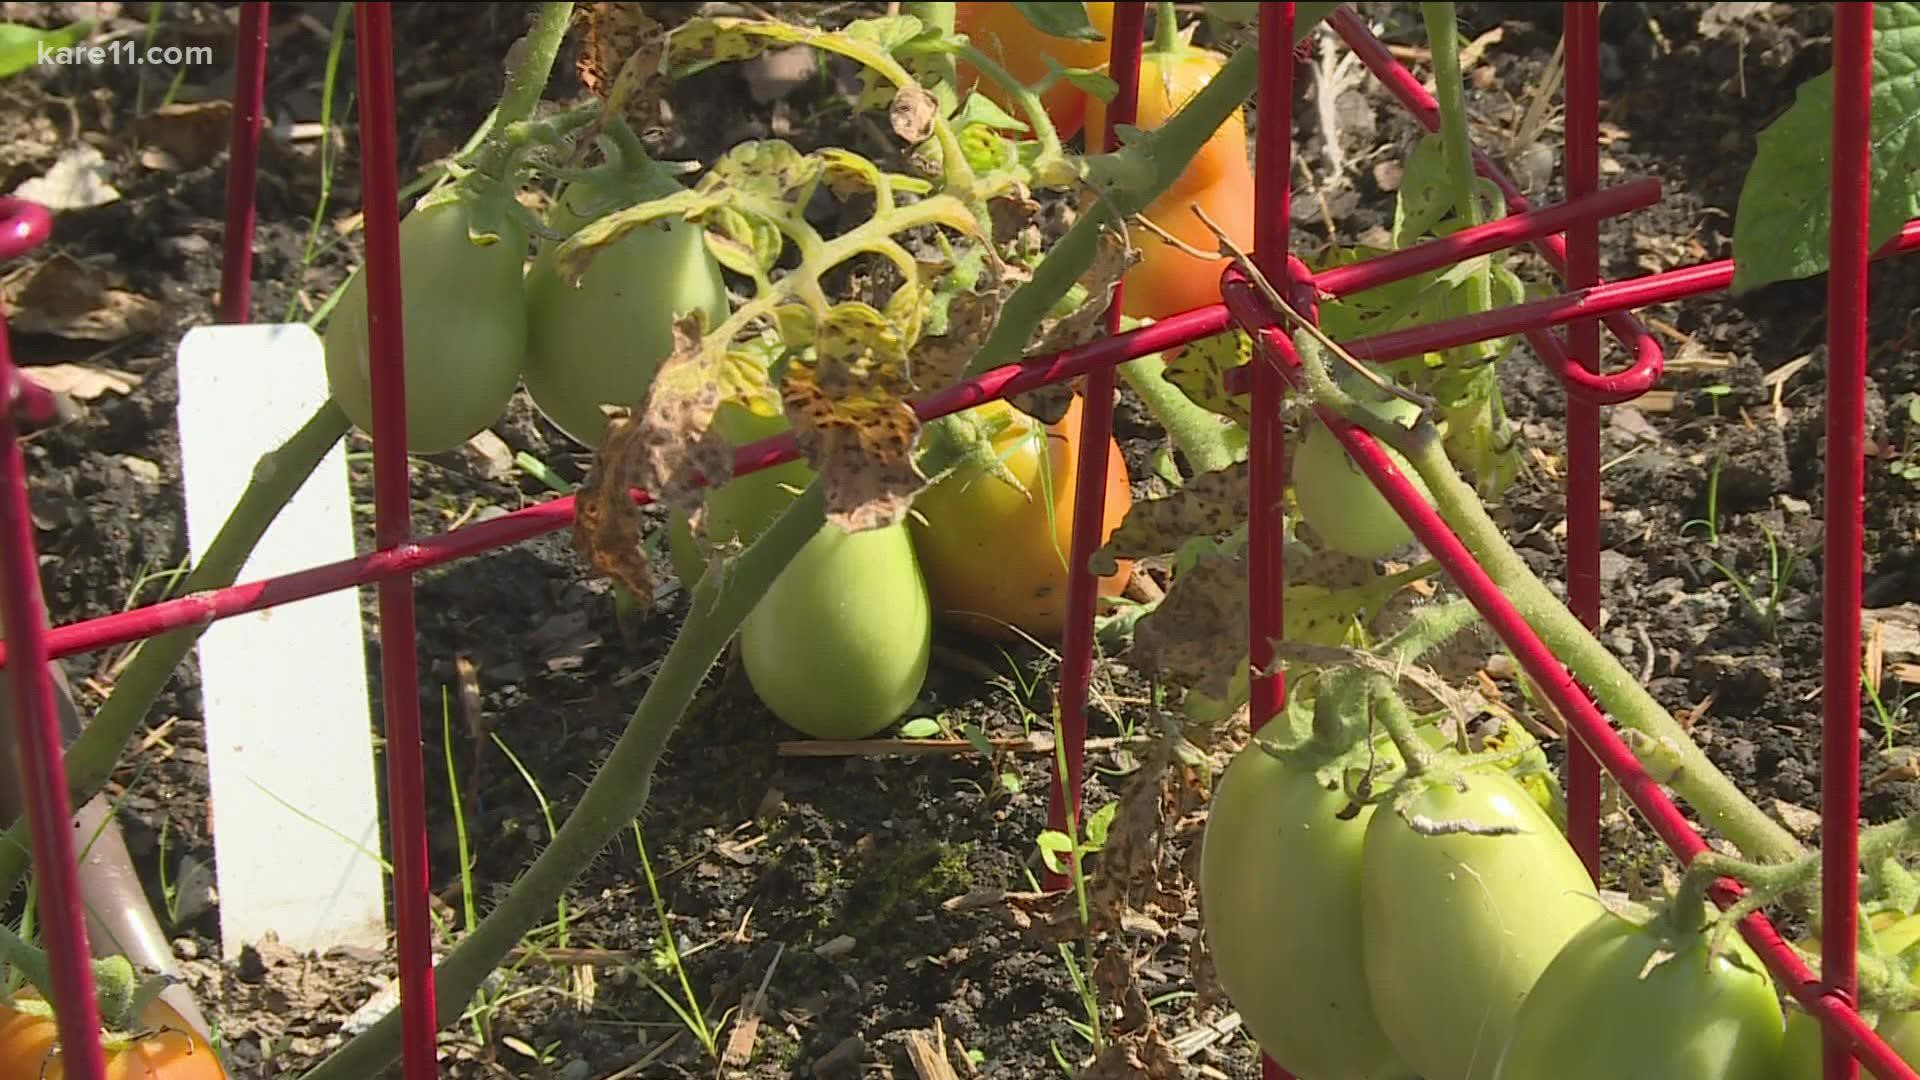 Many gardeners see this problem with their tomatoes. Here's some common advice and whether it really works.